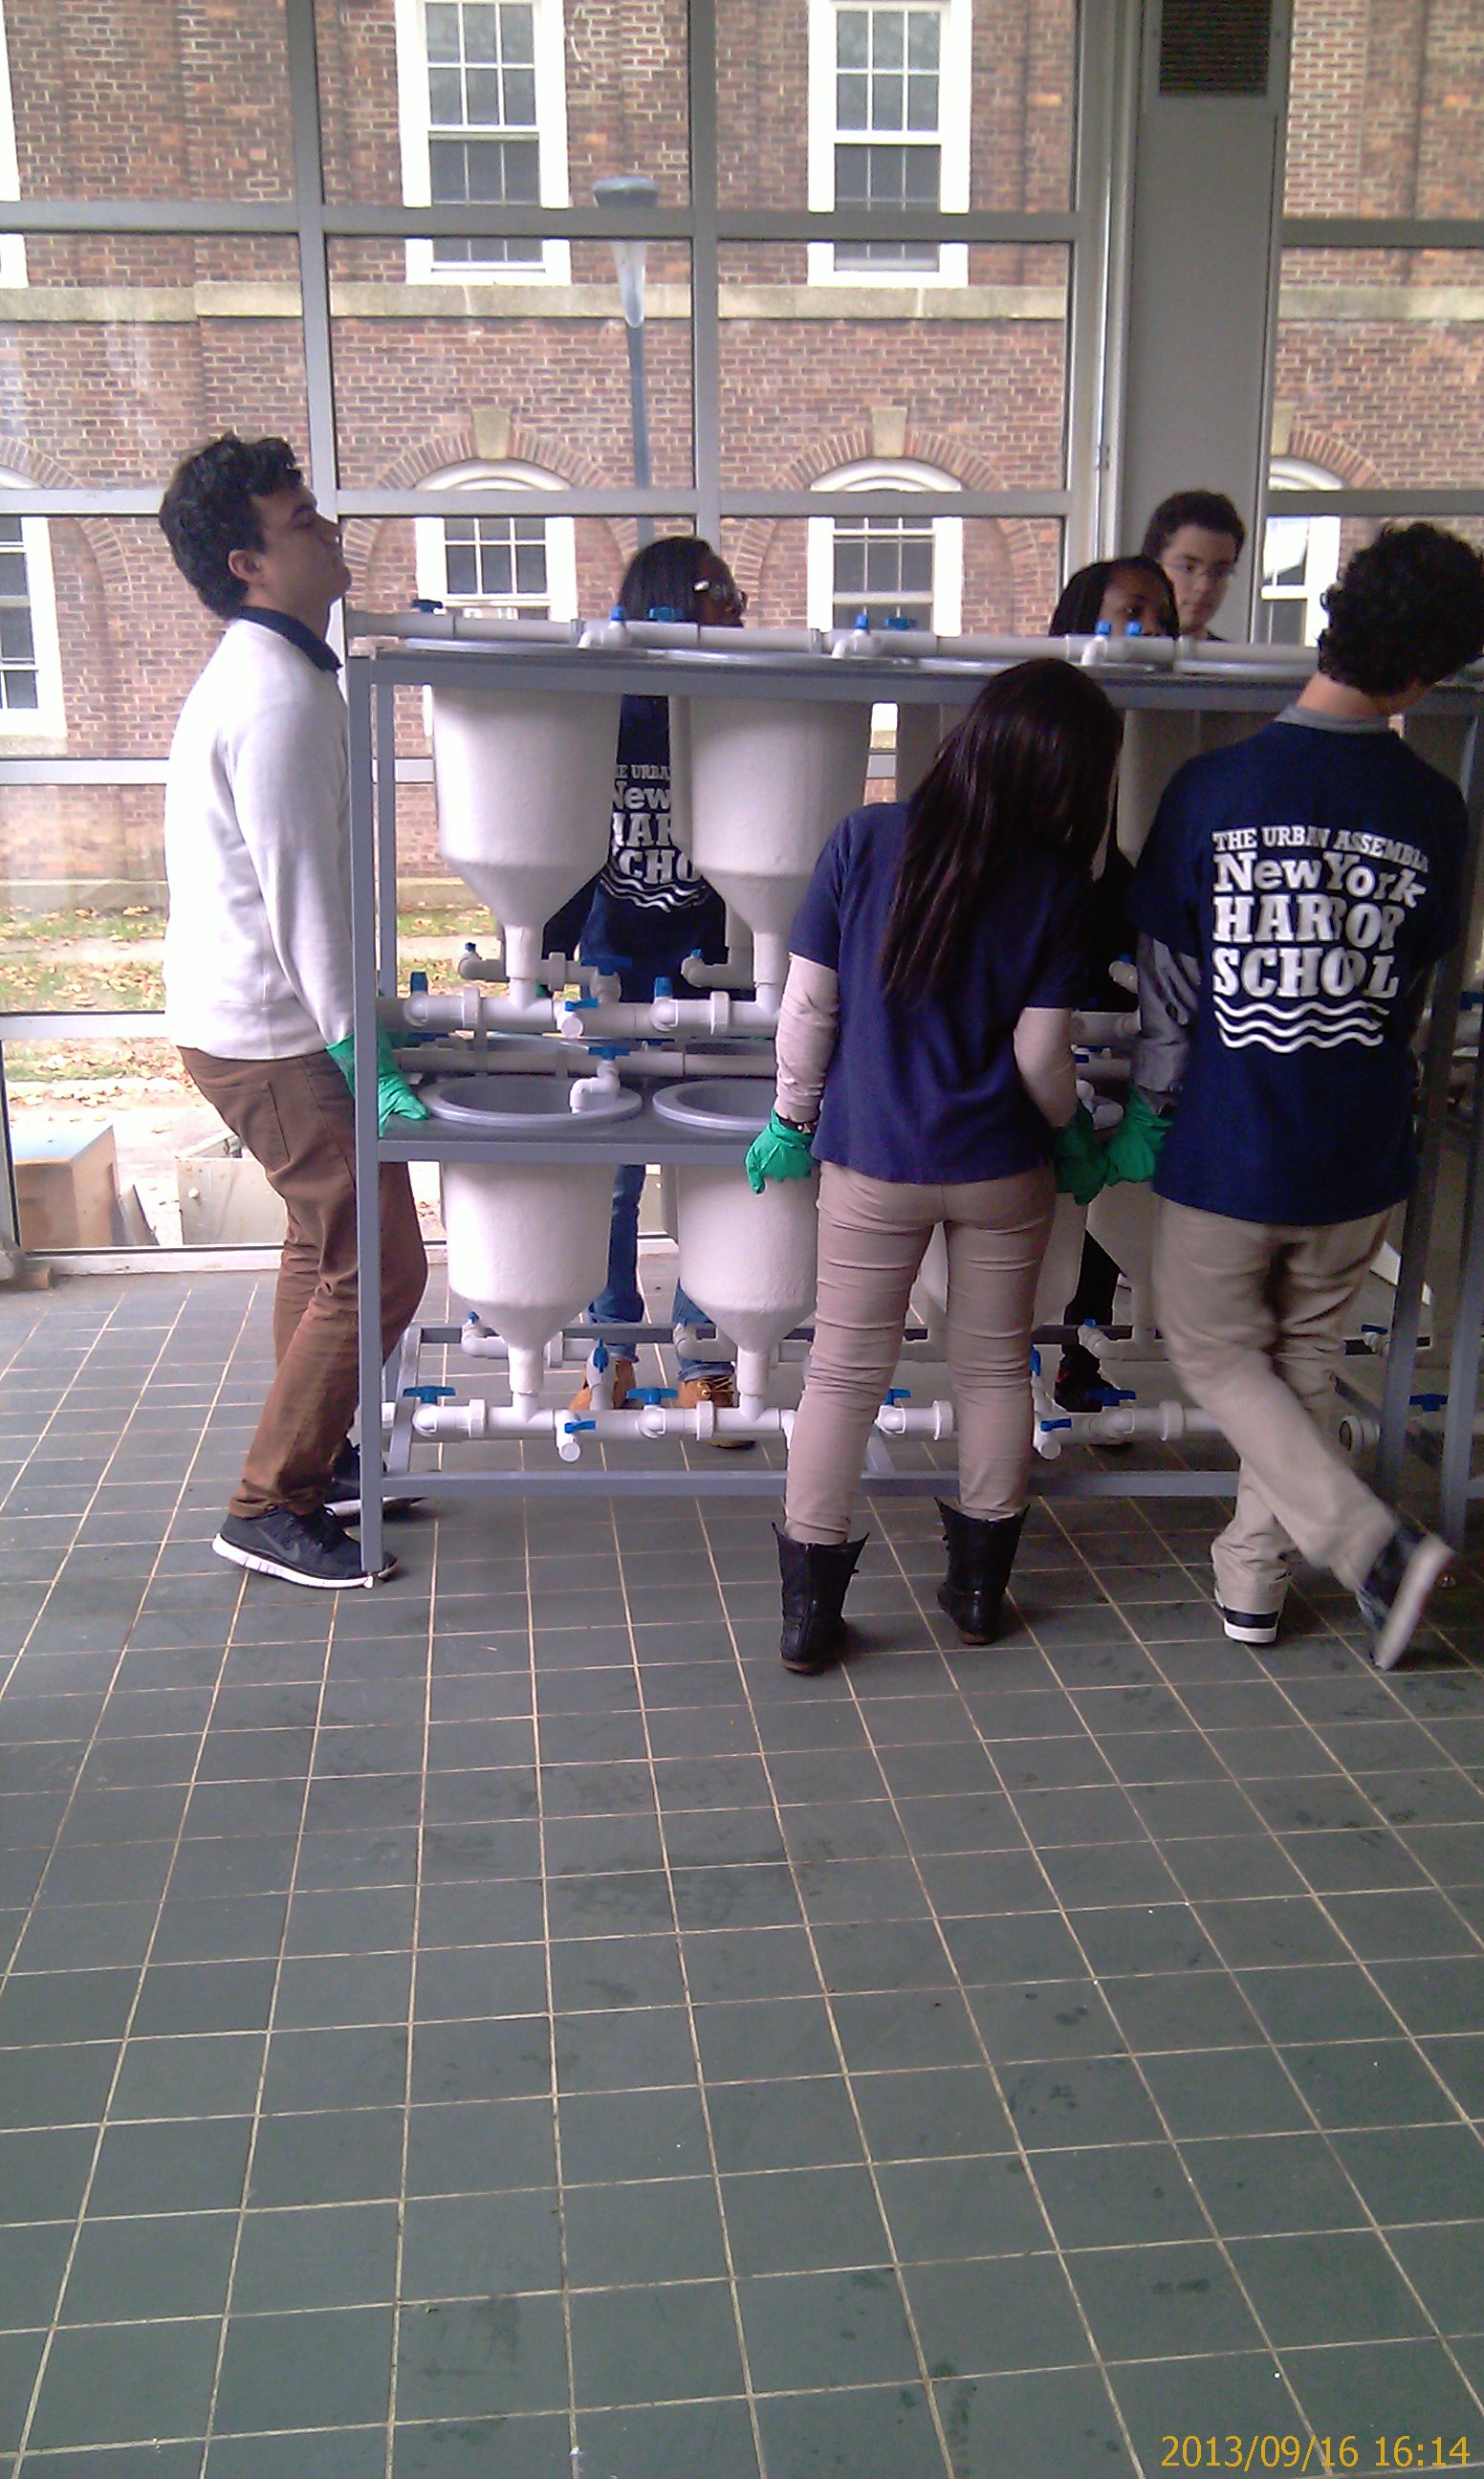 With the generous support of our scholars, we were able to move our lab to the Marine Science room in 3 days.